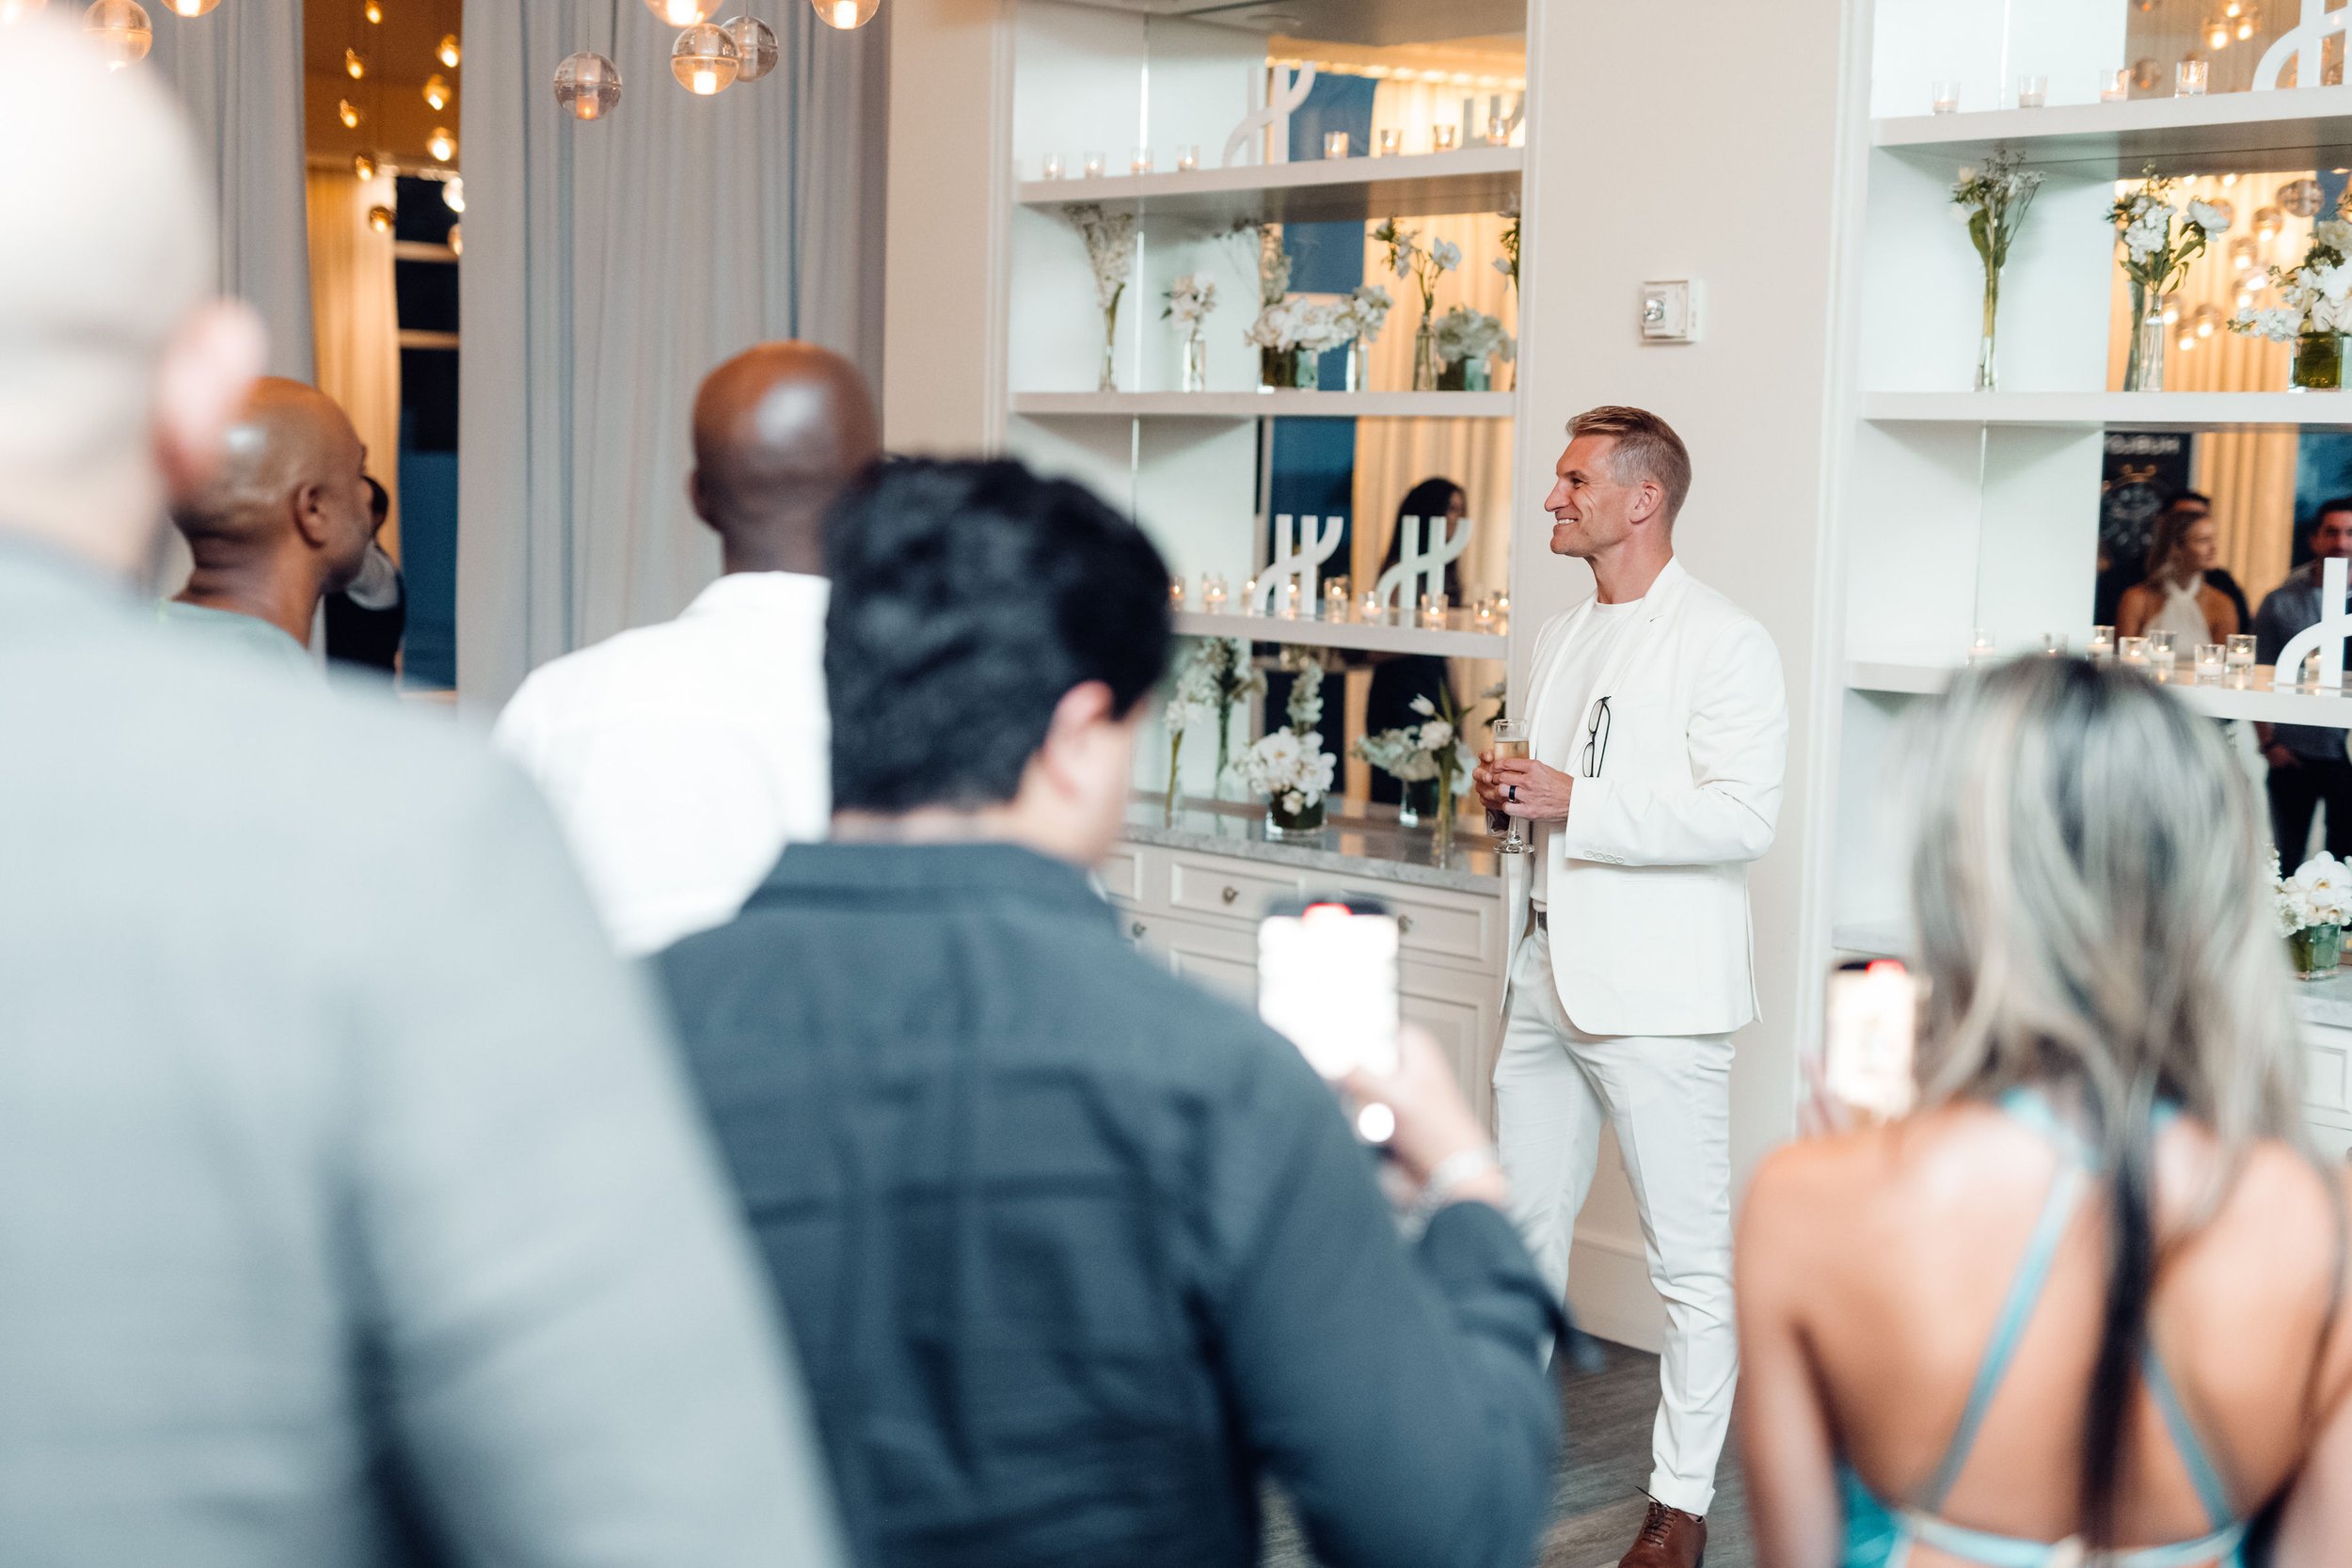 Thierry Richard of Hublot Bal Harbour introduces Hublot's Novelties to the United States